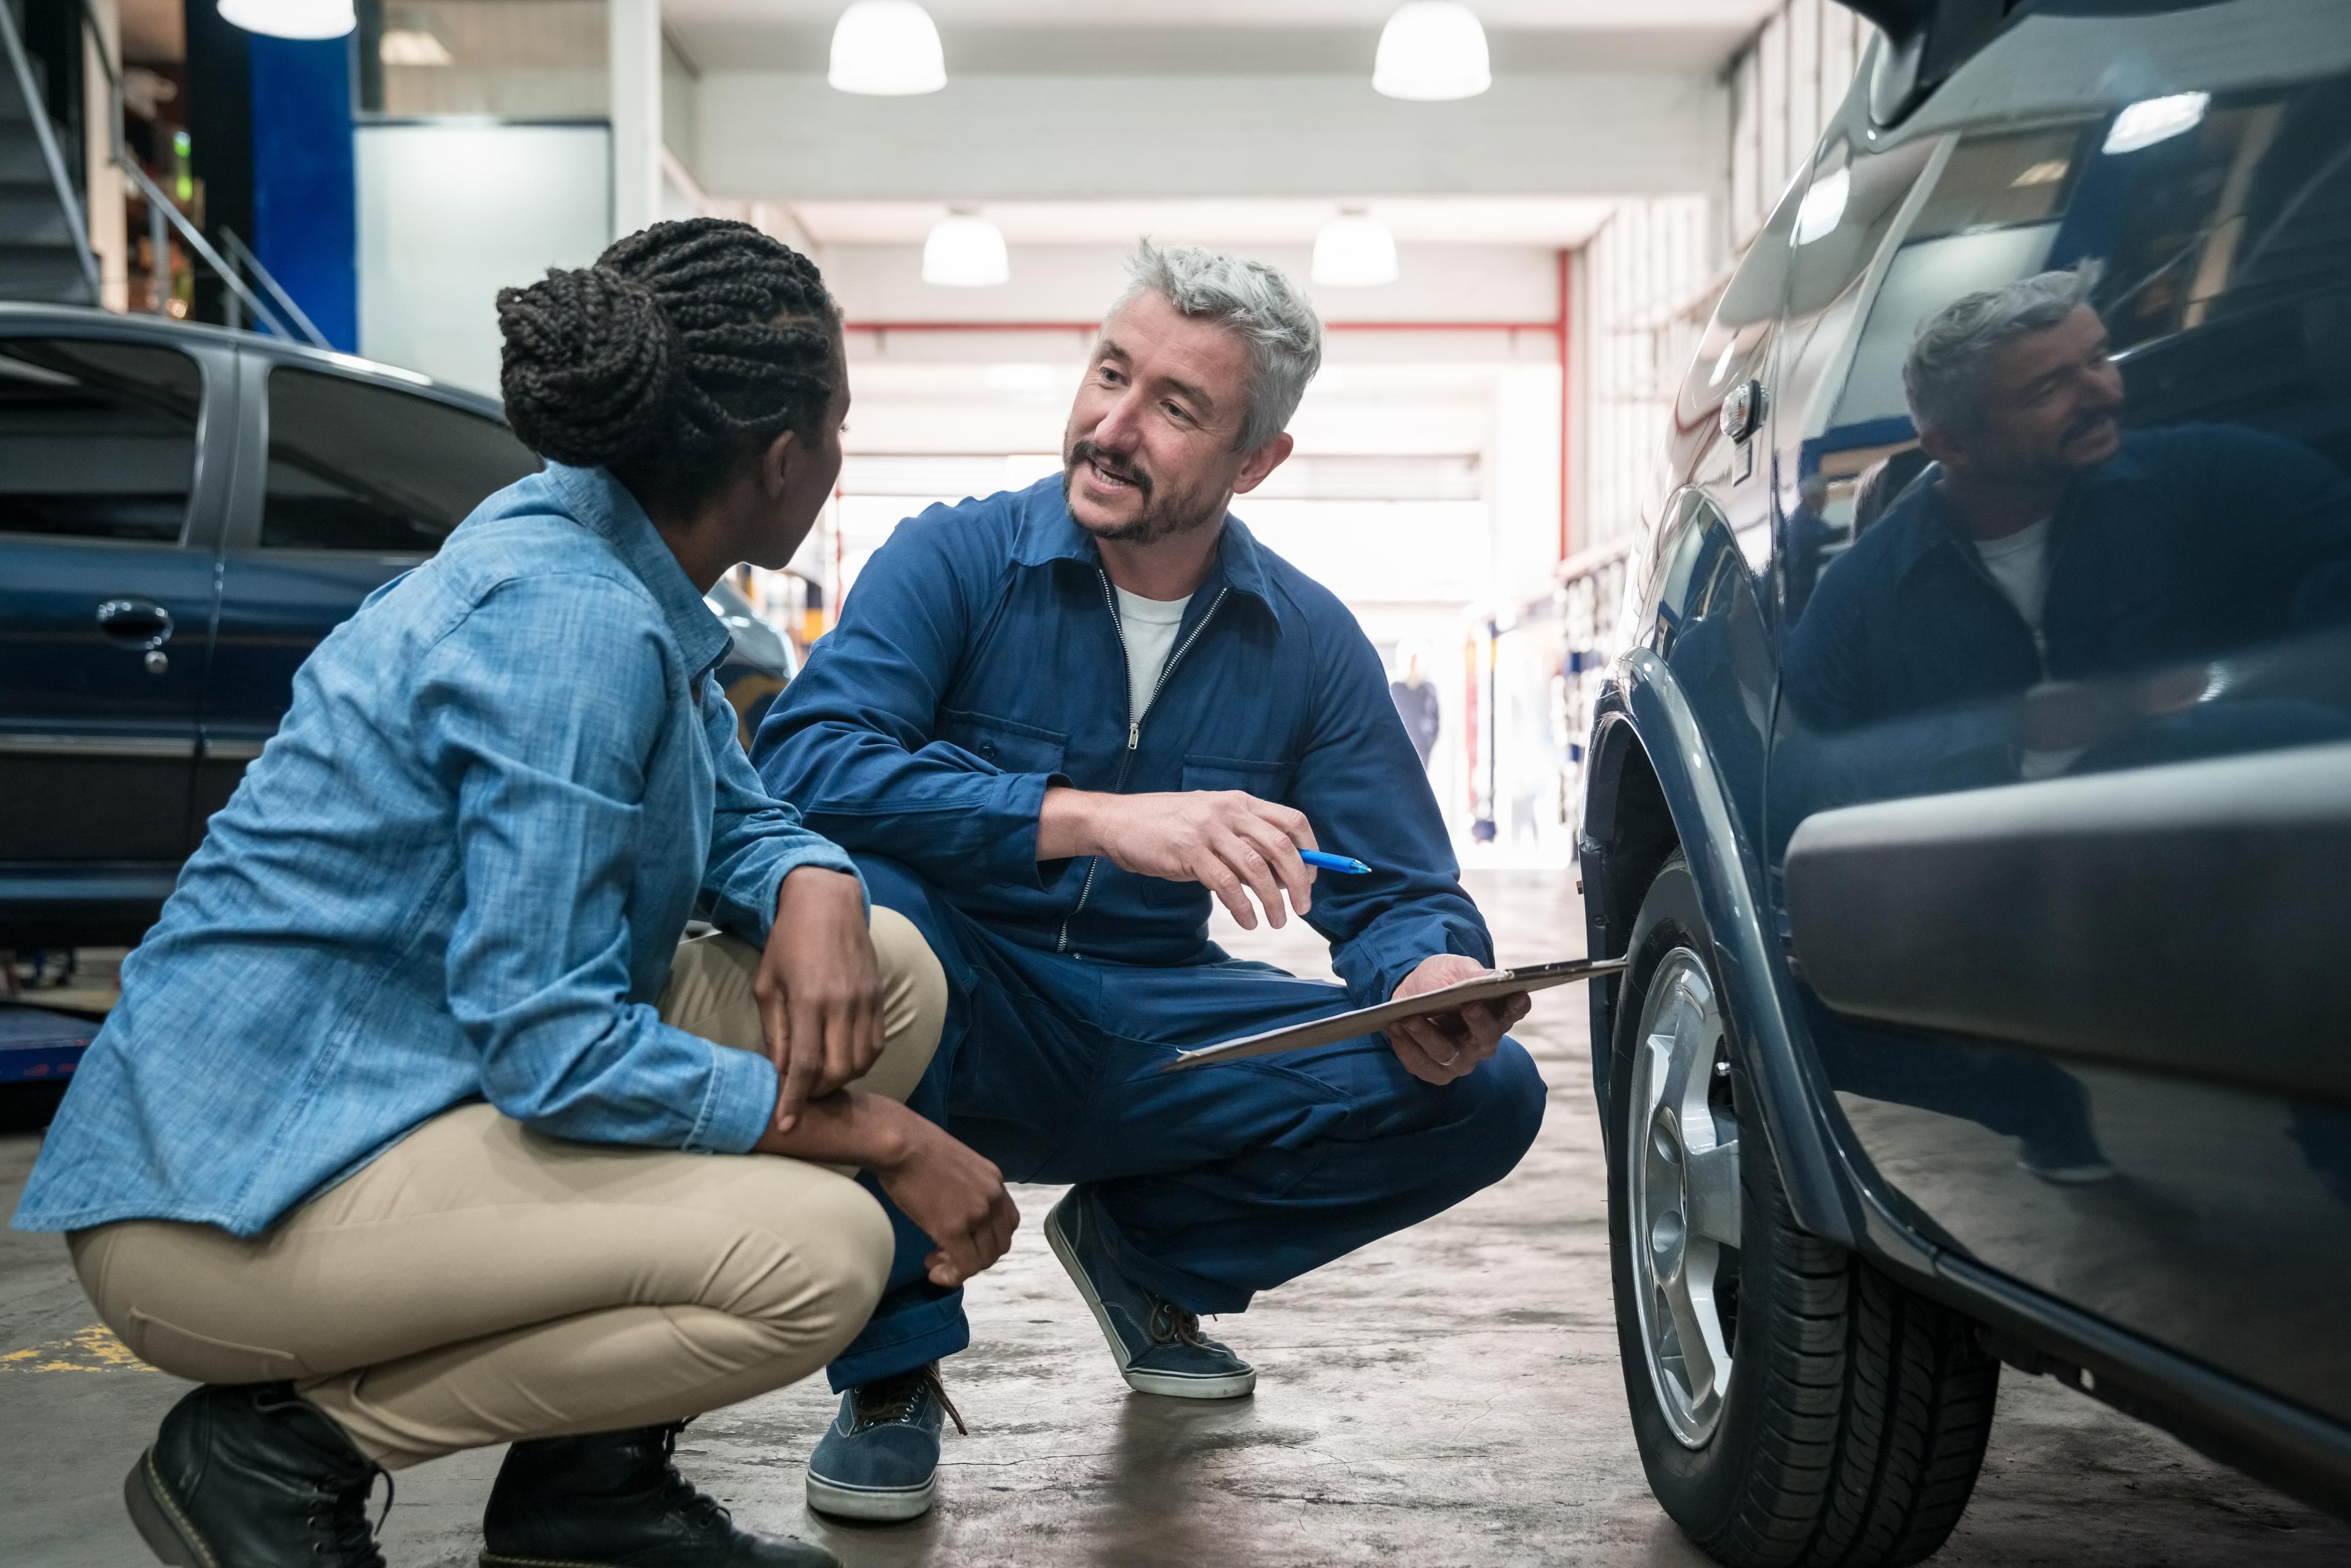 Two people are crouched down on the floor, one is a mechanic showing the other something on a car